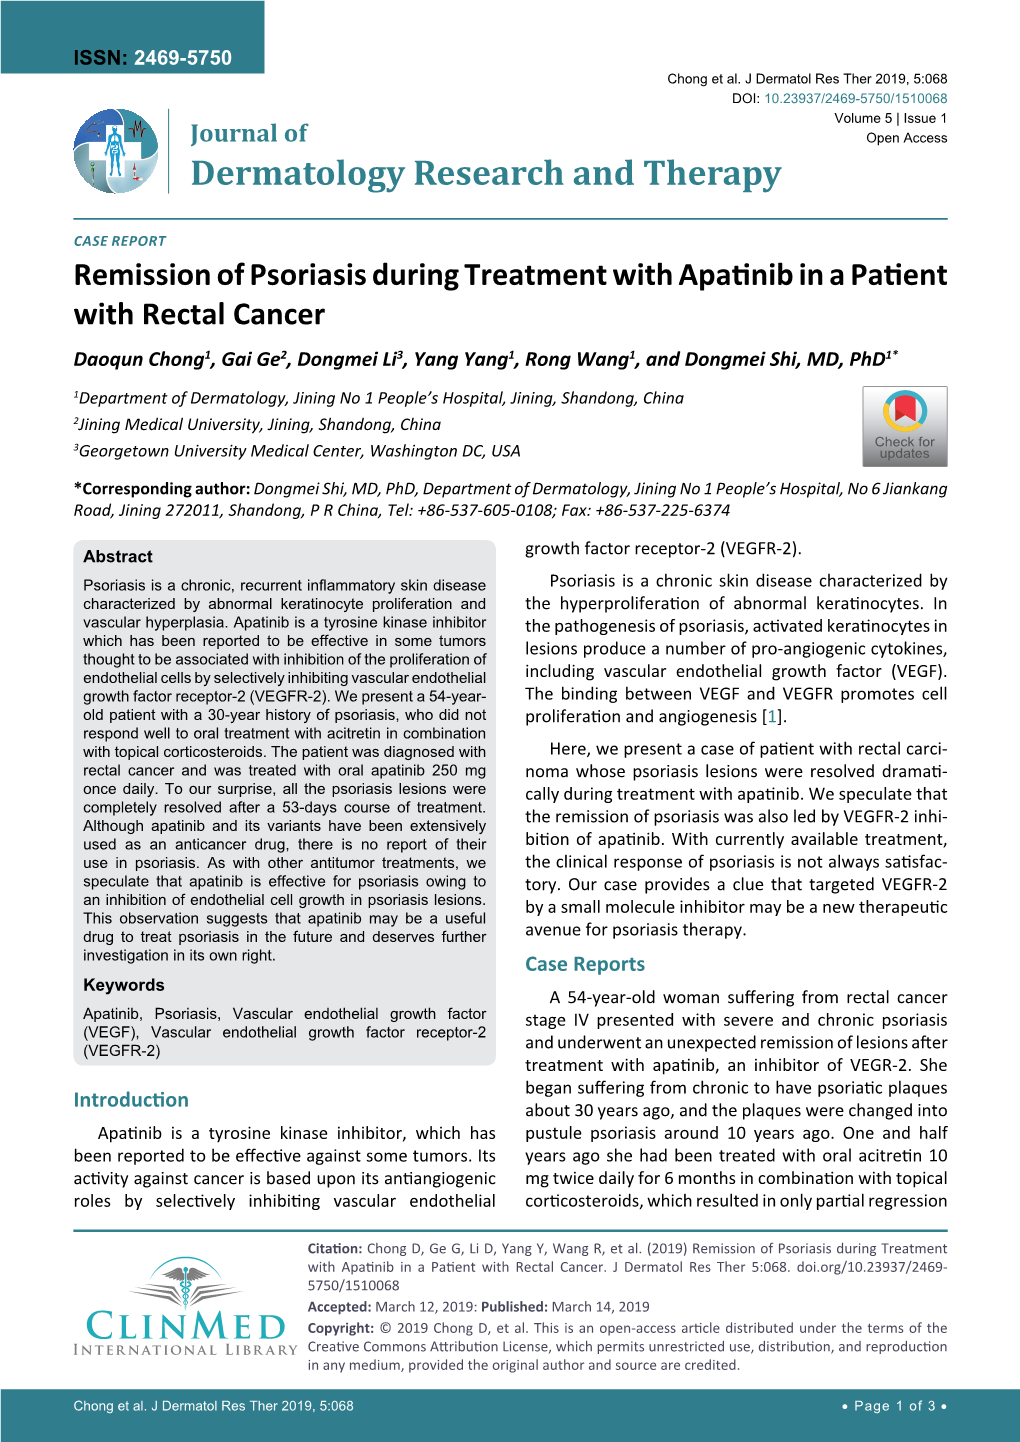 Remission of Psoriasis During Treatment with Apatinib in a Patient